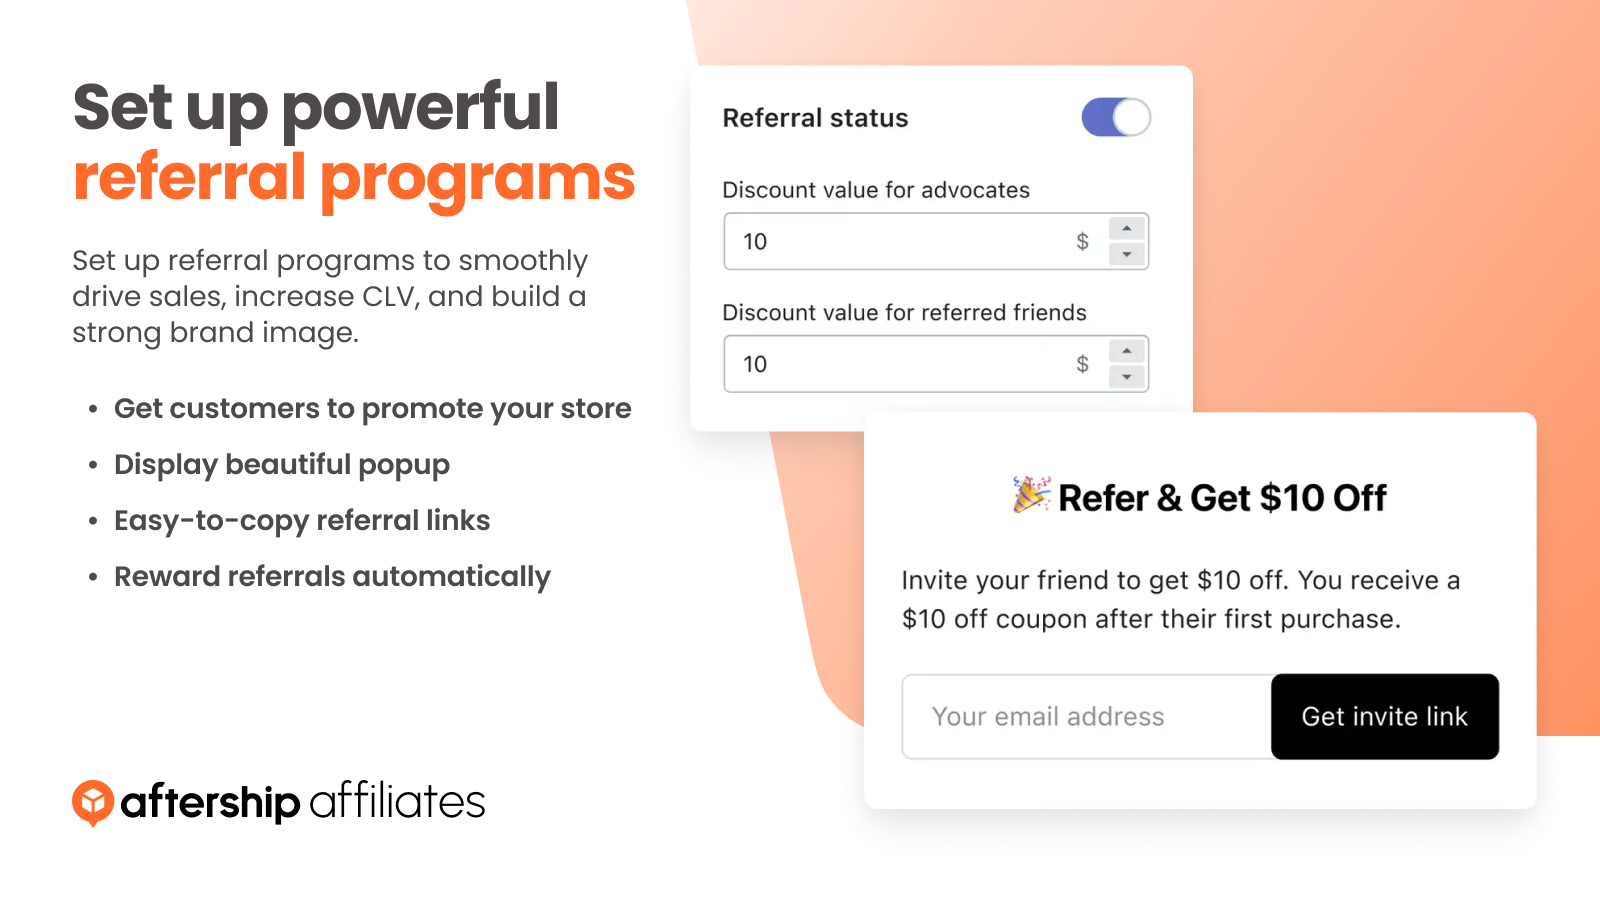 Set Up Powerful Referral Programs